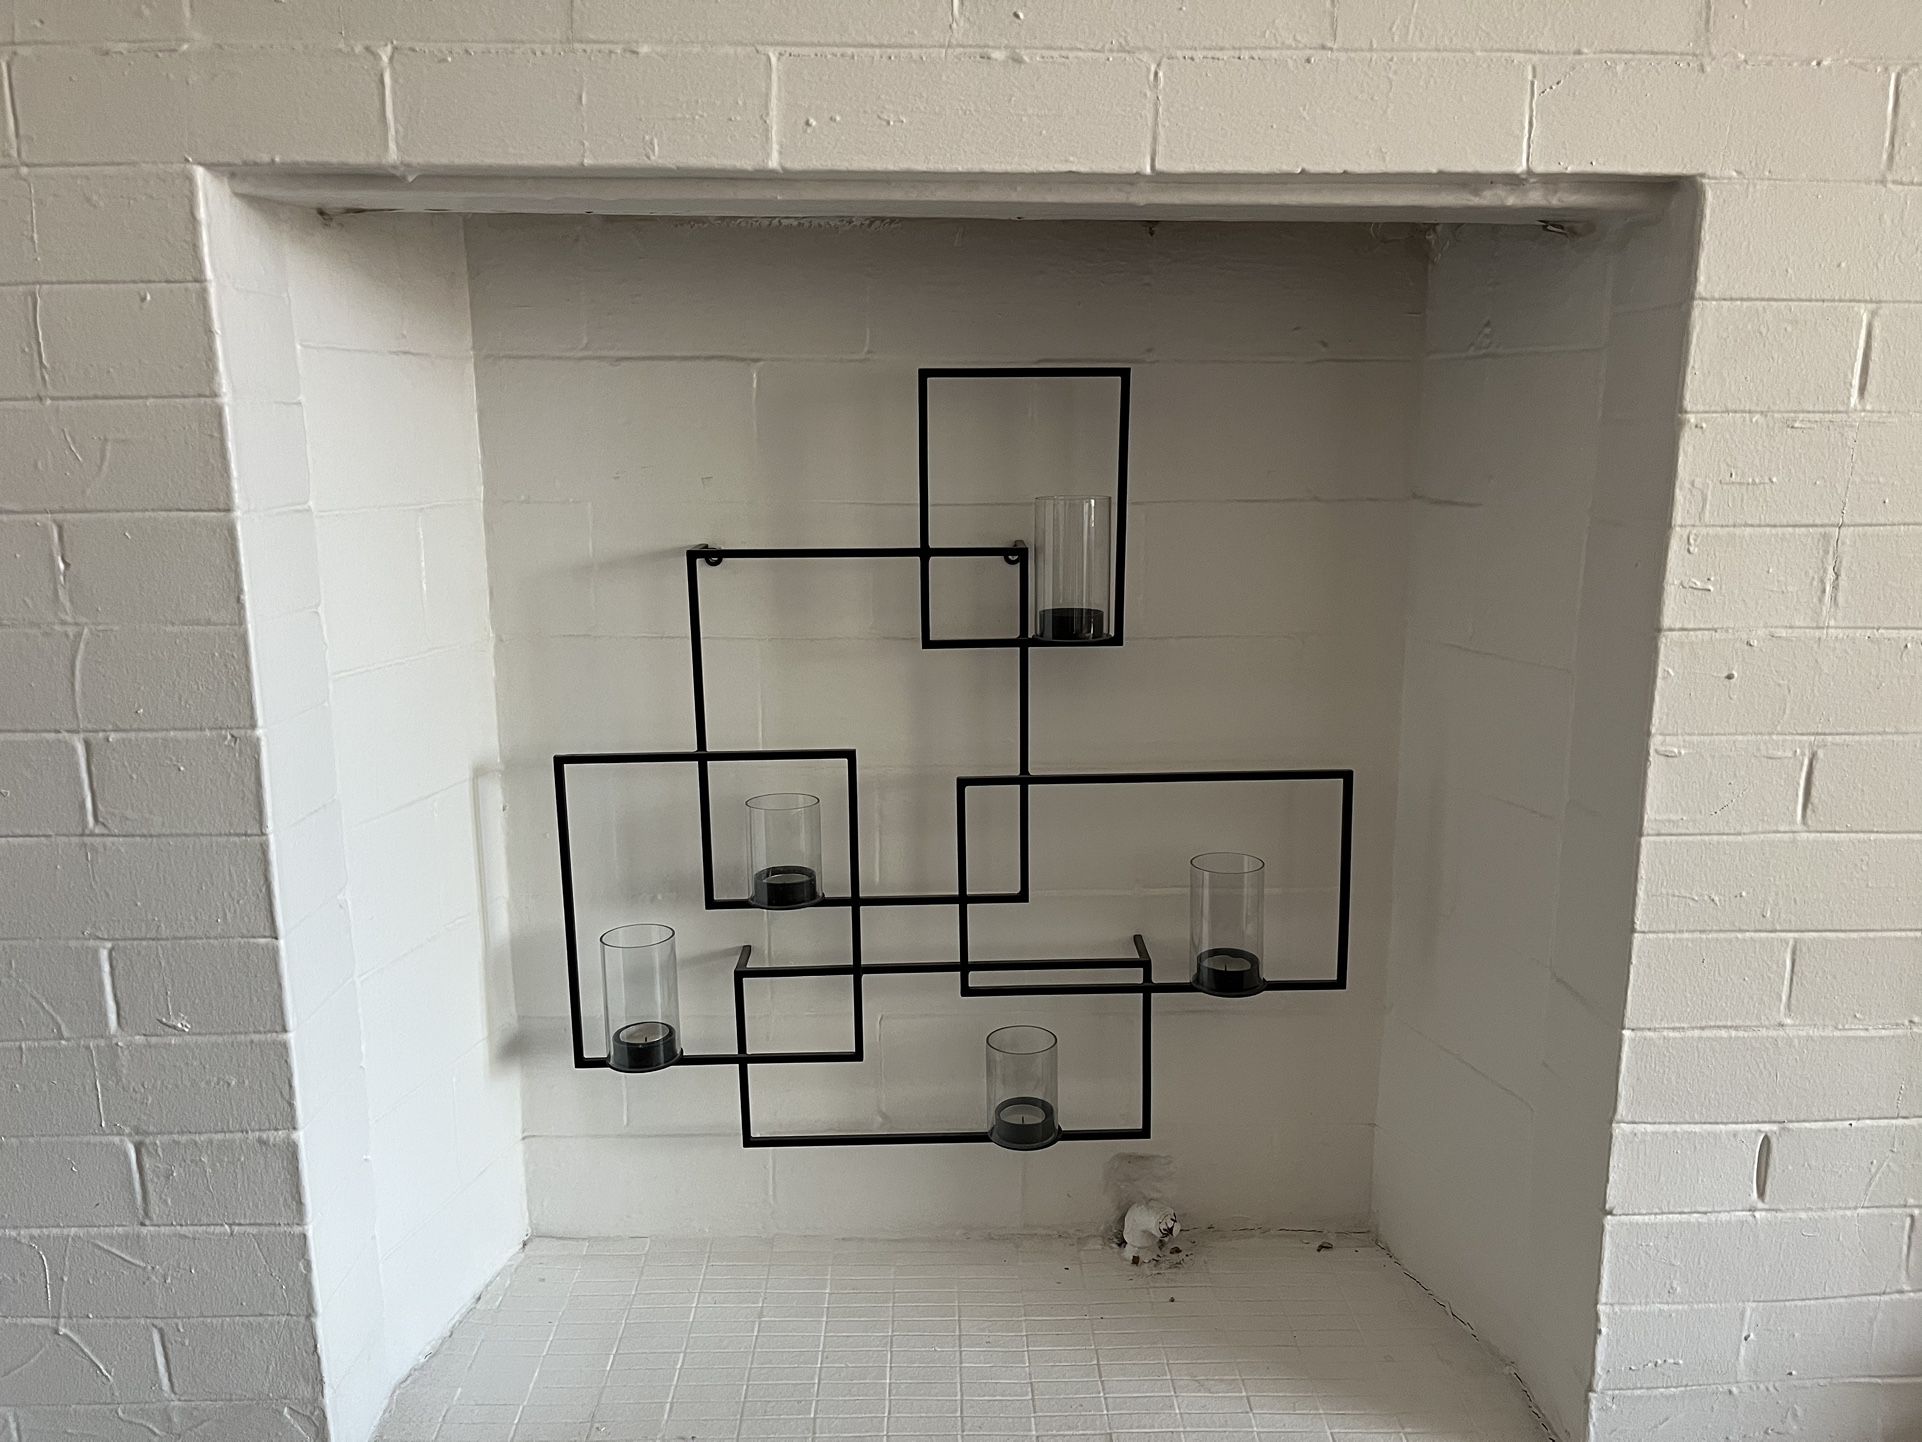 Fireplace or Wall Candle Holder